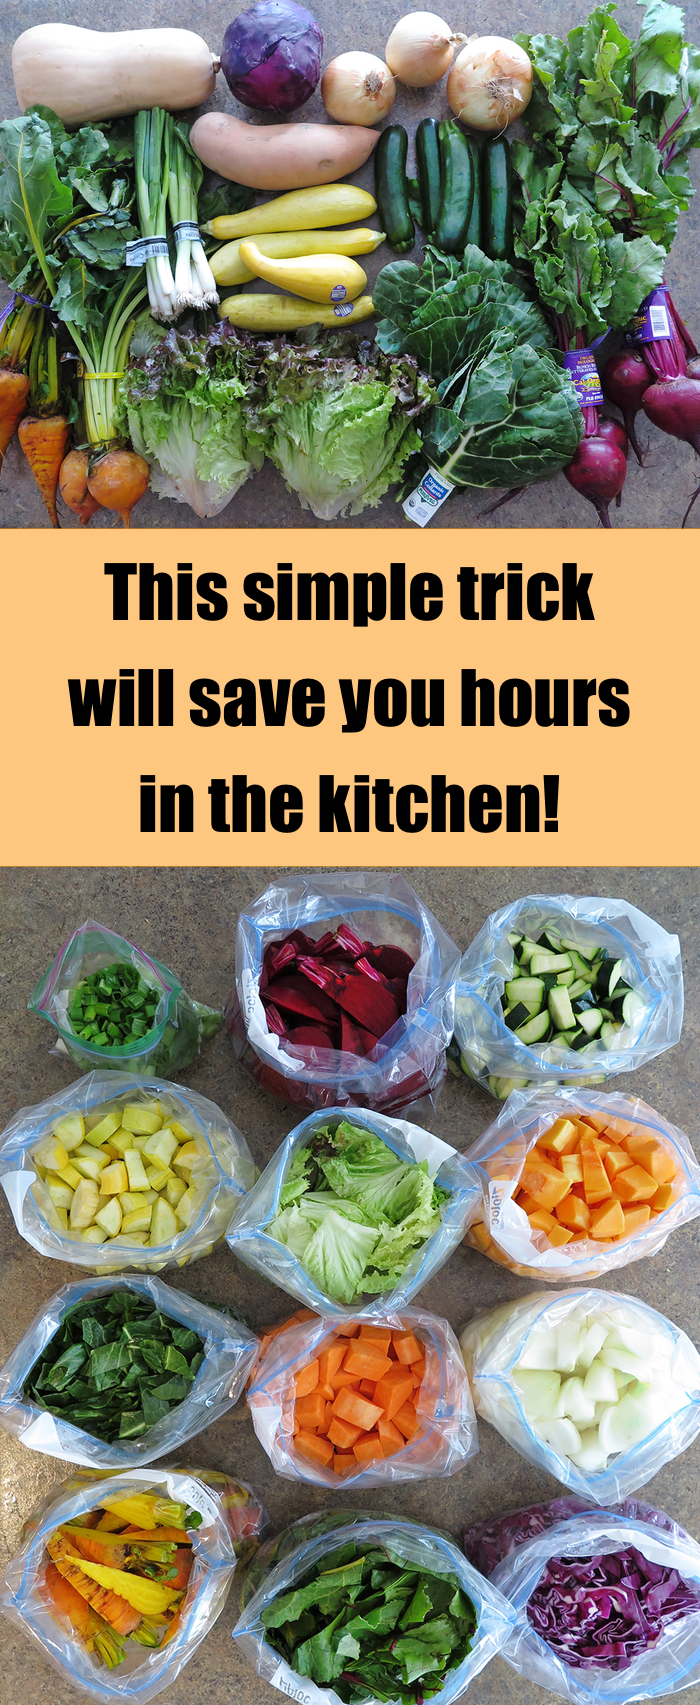 This Simple Trick Will Save You Hours in the Kitchen Later!